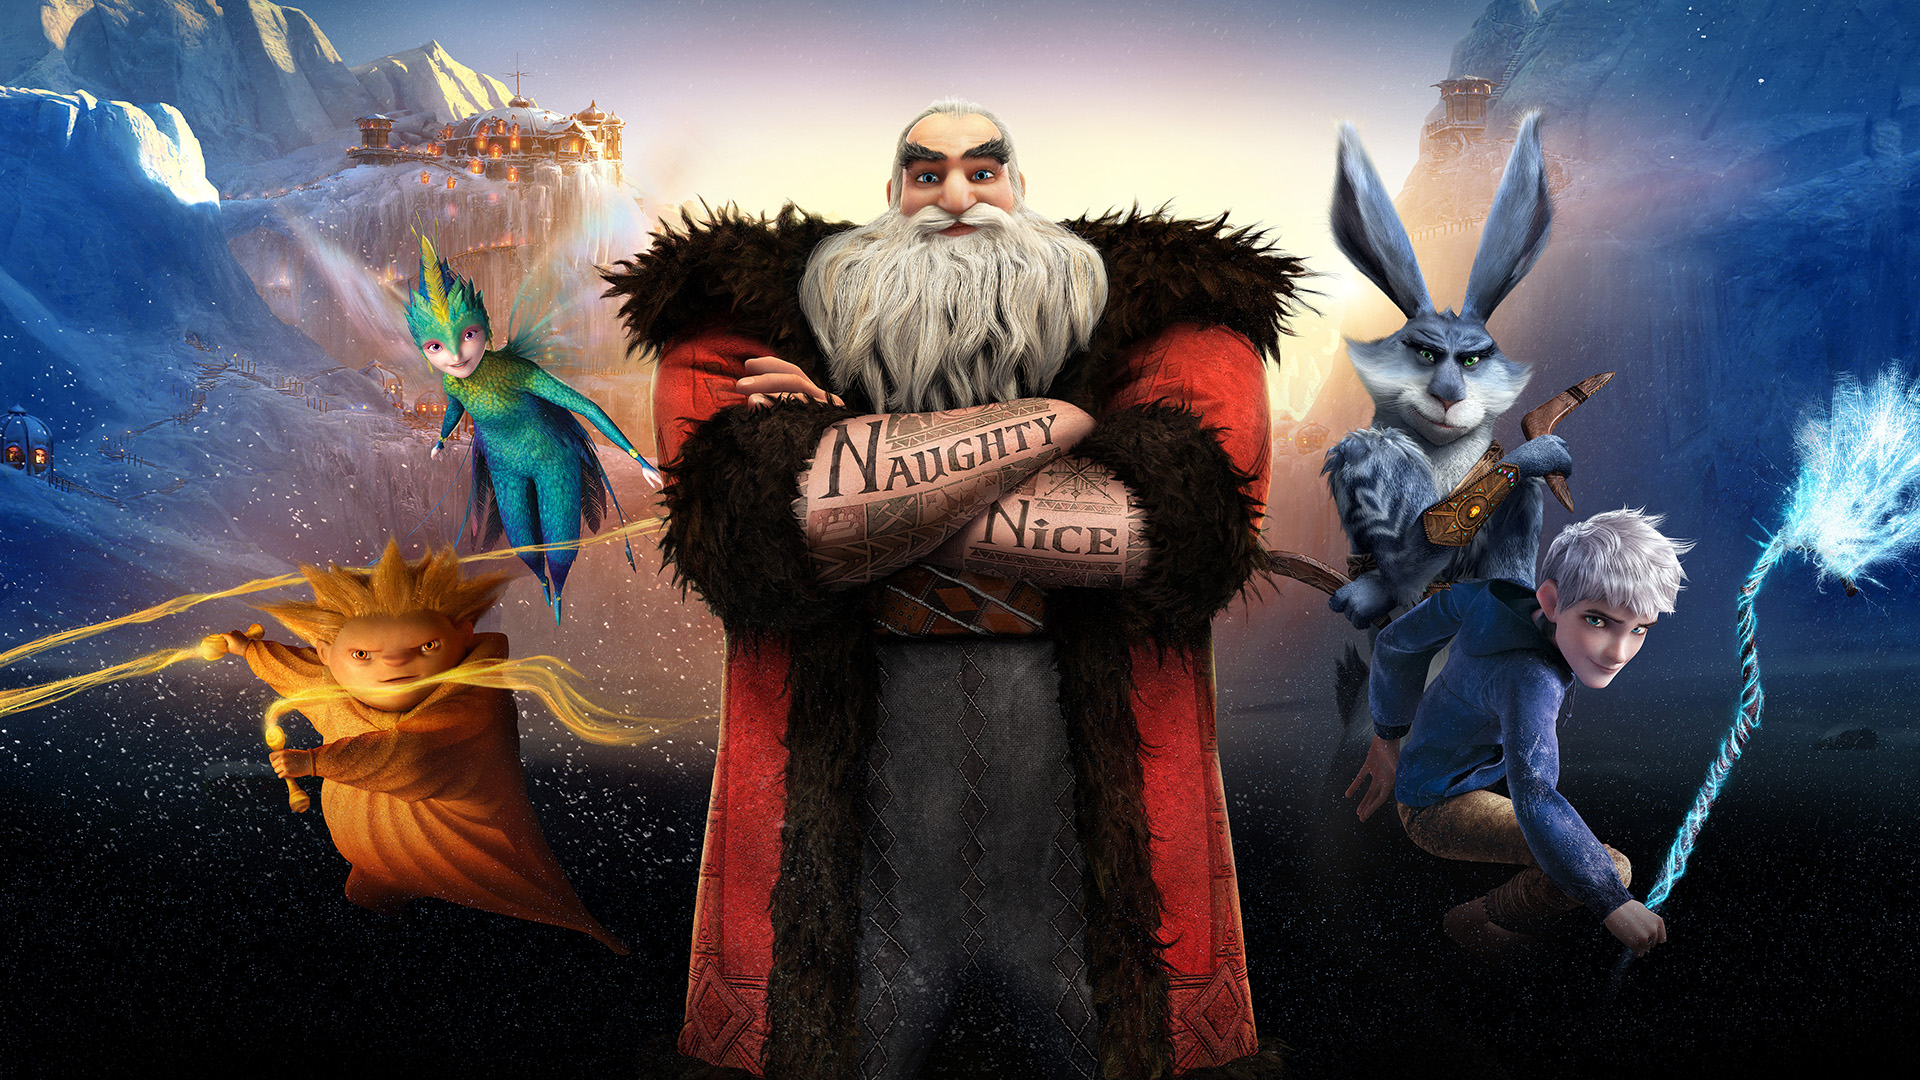 RISE OF THE GUARDIANS w wallpaper 1920x1080 102494 WallpaperUP